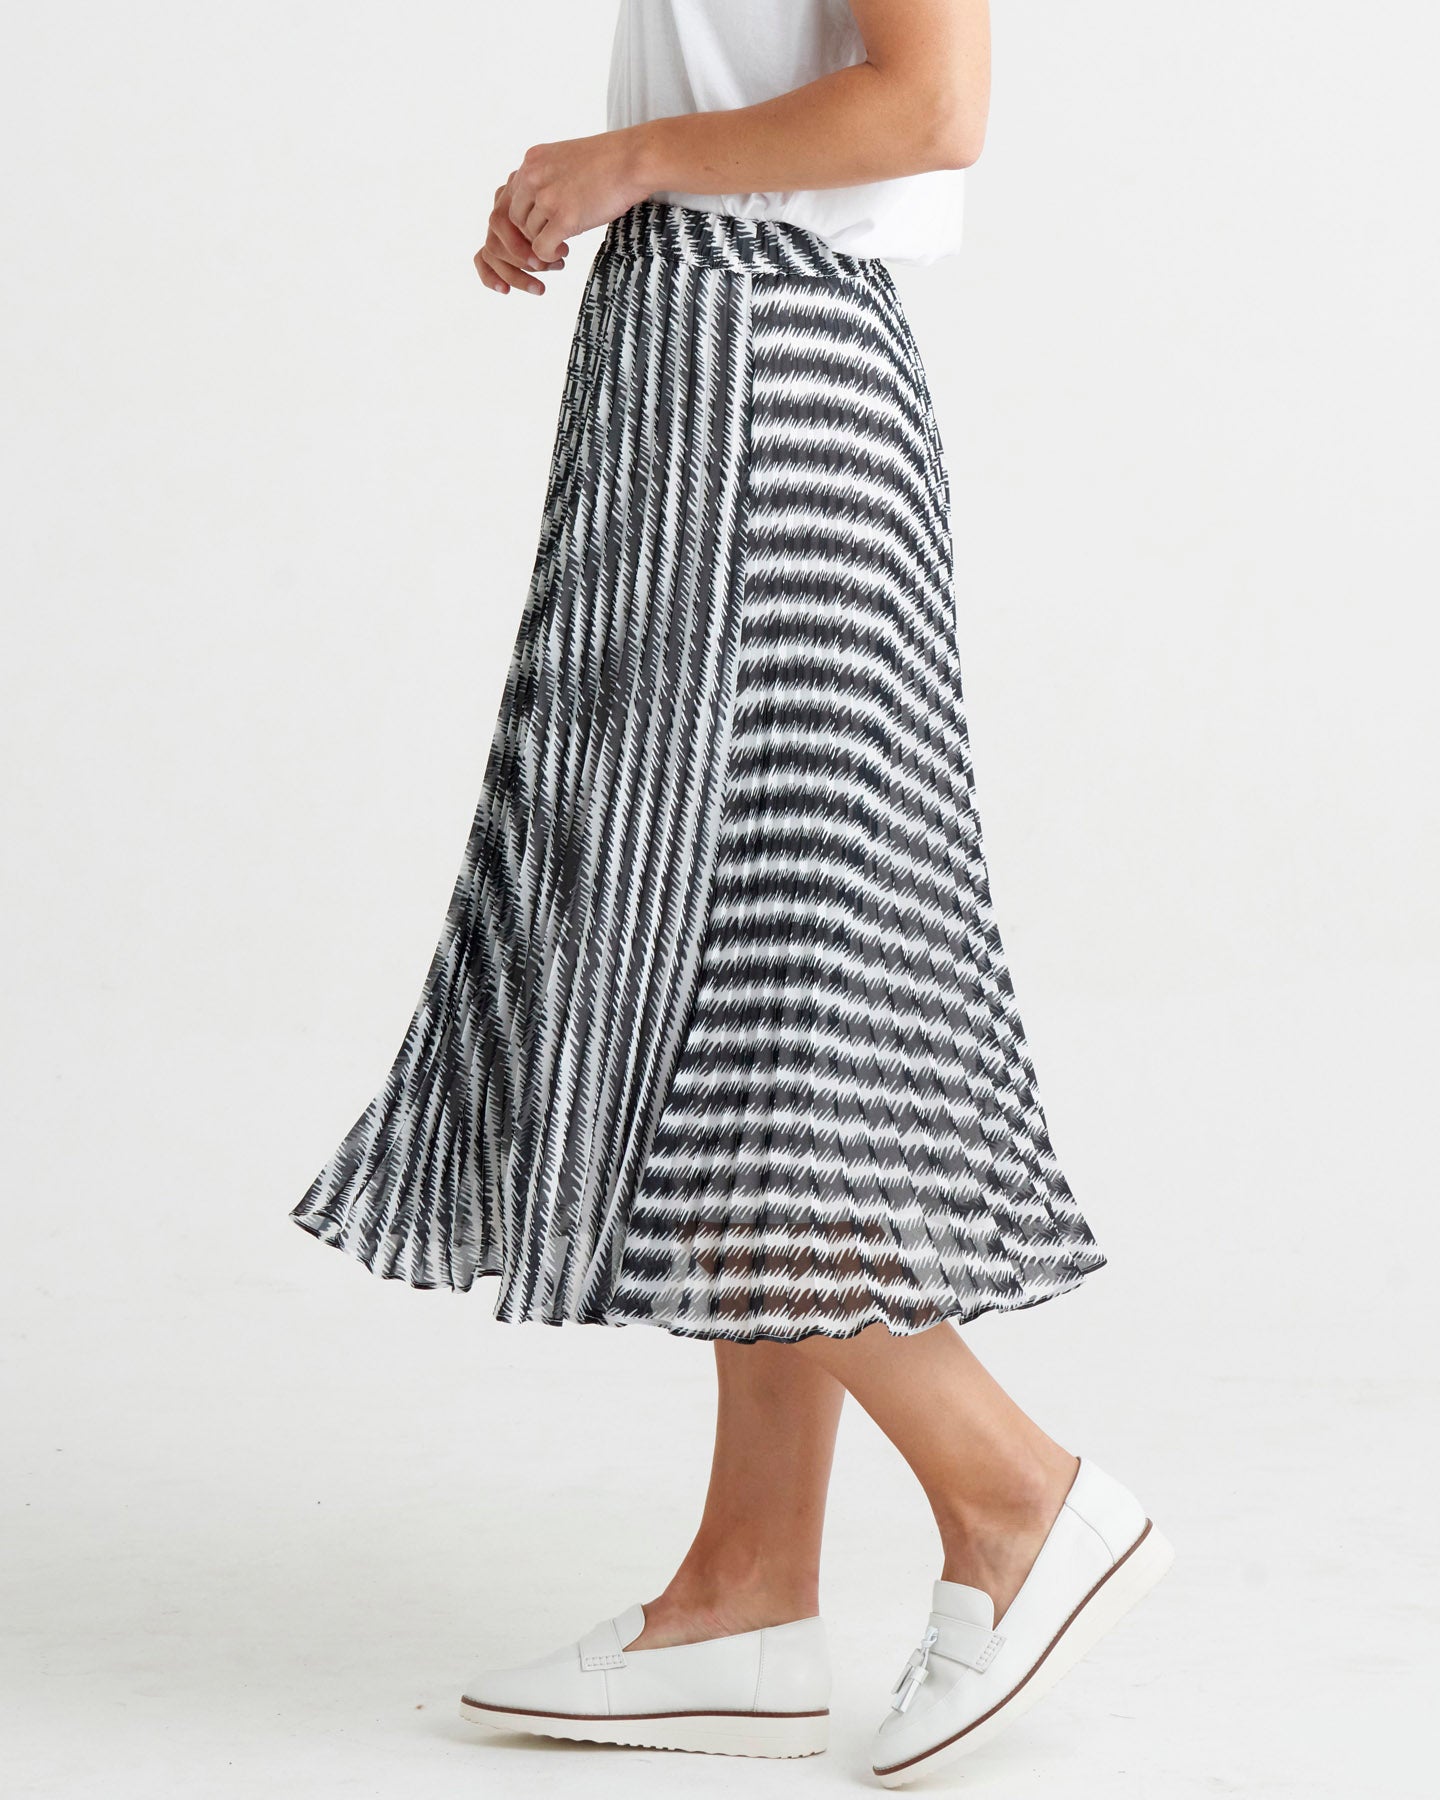 Chanel Pleated Skirt - Black Abstract